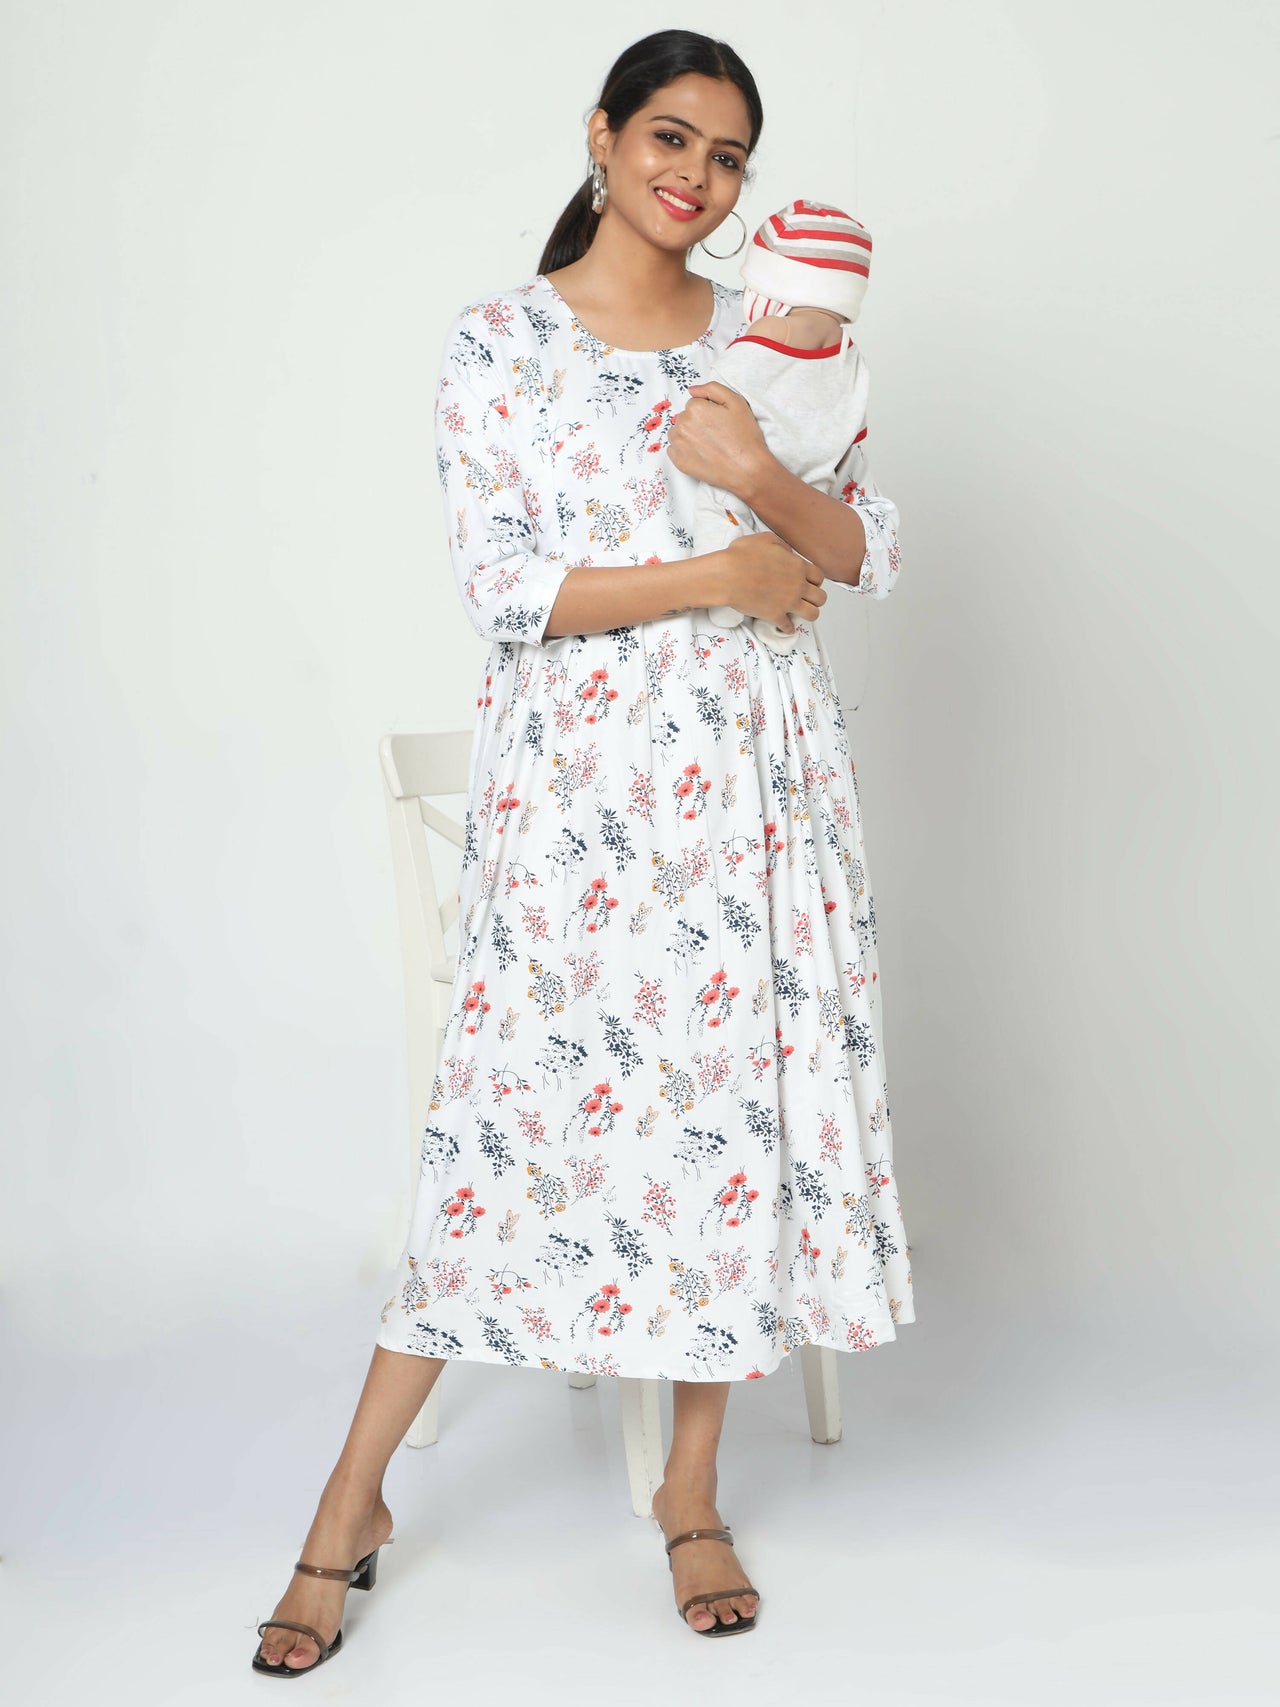 Manet Three Fourth Maternity Dress Floral Print With Concealed Zipper Nursing Access - White - Distacart